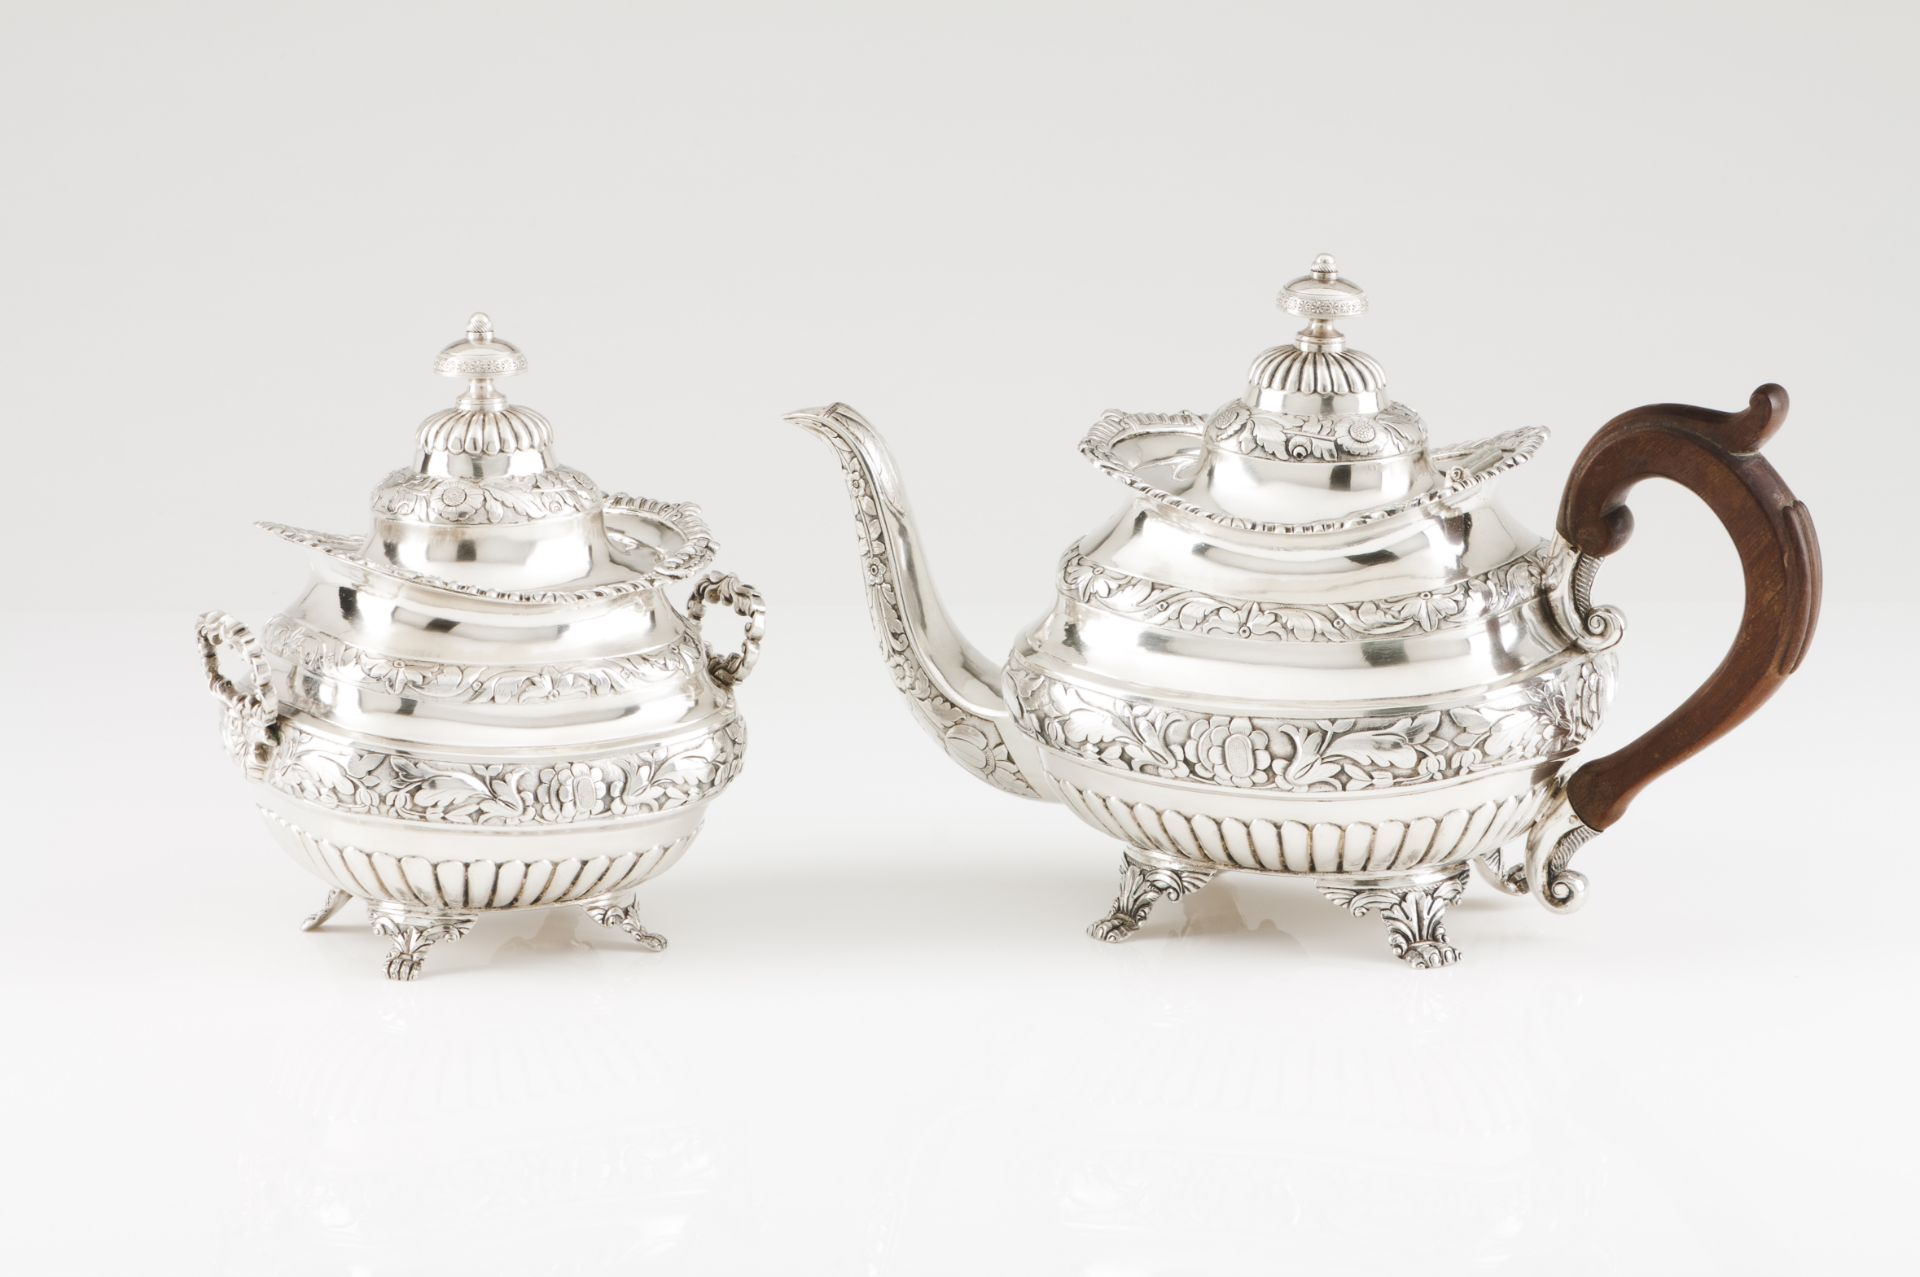 A mid-19th century Portuguese silver tea pot and sugar bowlRaised on claw feet, fluted and relief